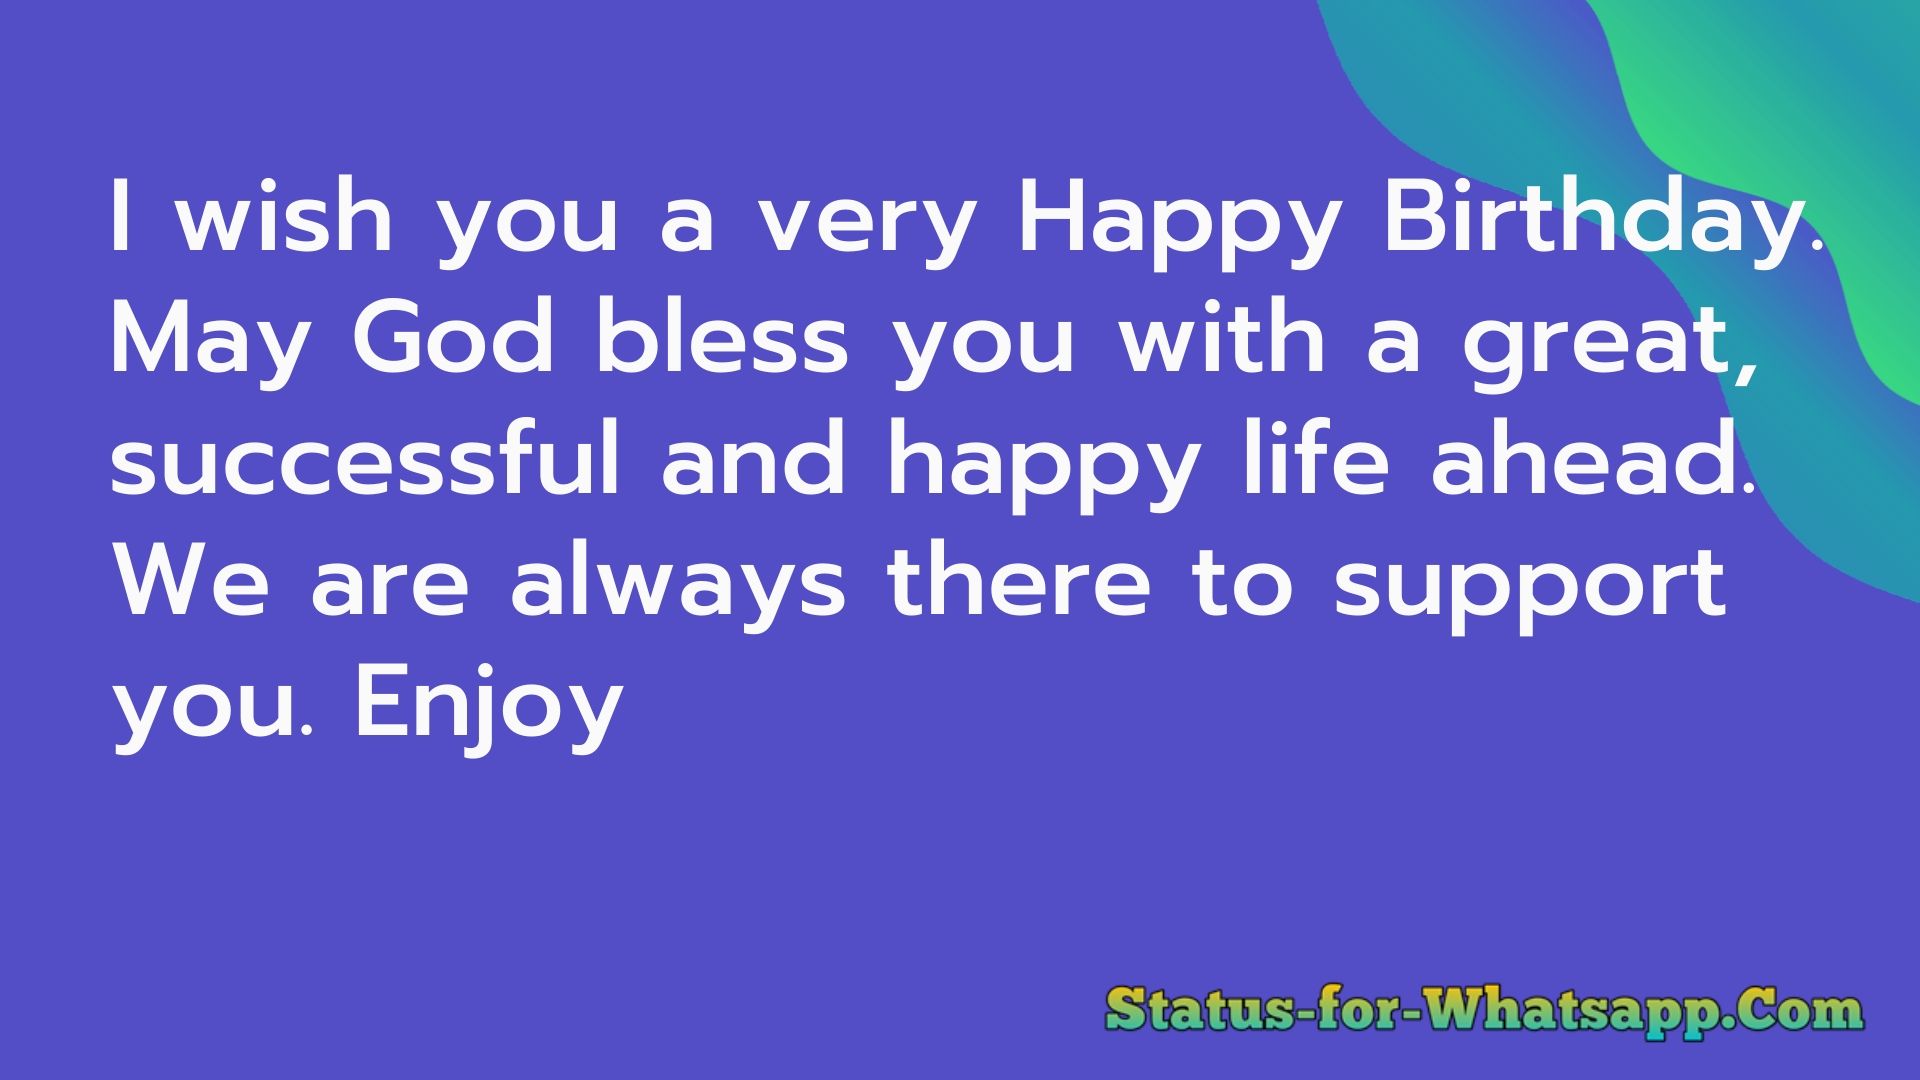 Birthday Wishes For Daughter birthday quotes, birthday greetings, birthday wishes quotes, birthday message, birthday wishes messages, wish you happy birthday, happy birthday daughter, birthday wishes to daughter, happy birthday daughter images, special birthday wishes, simple birthday wishes